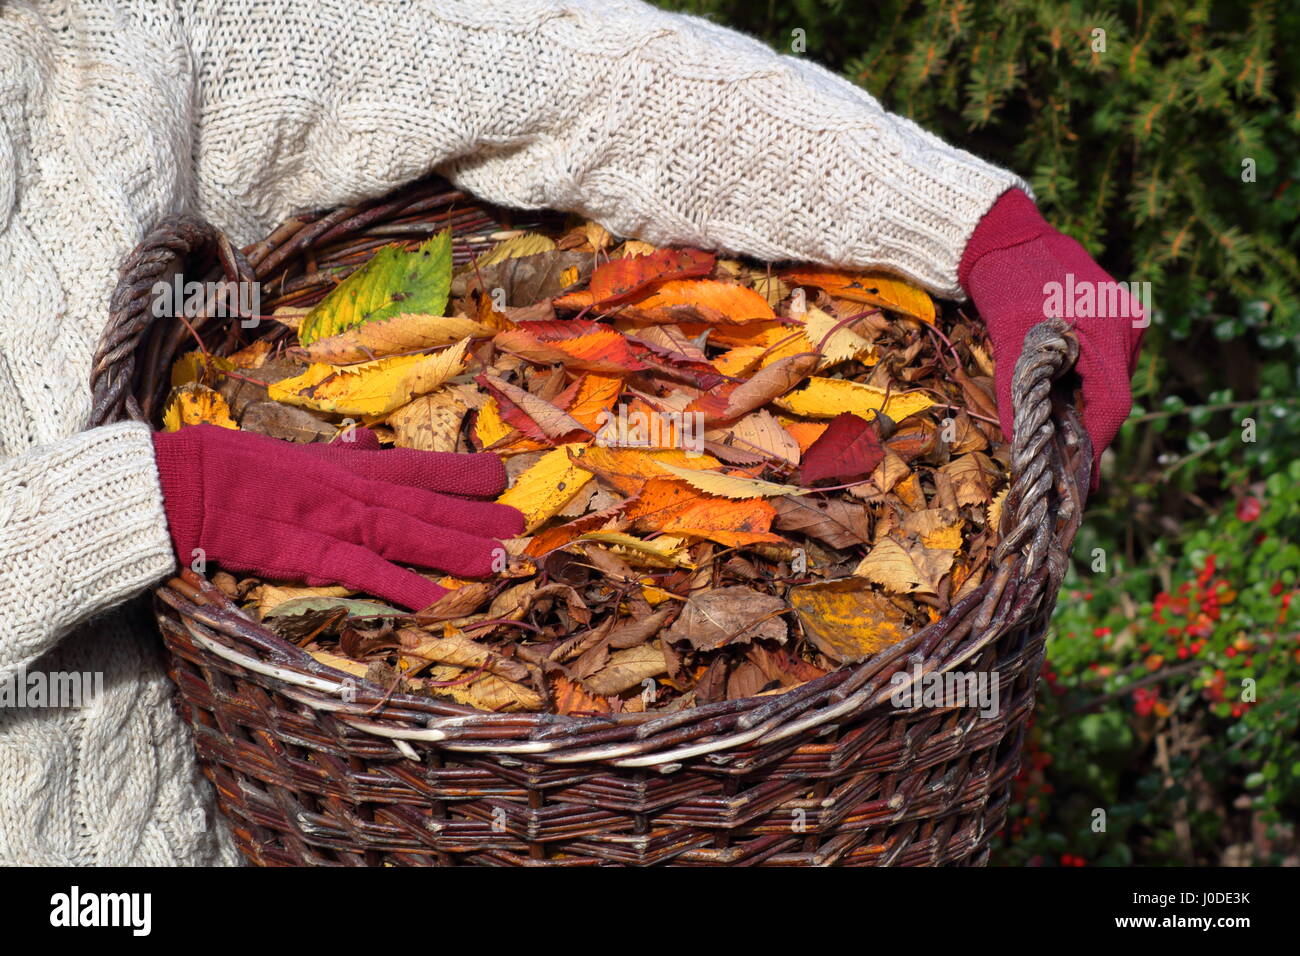 A female gardener carries ornamental cherry tree leaves (prunus) gathered from an English garden lawn in a basket - autumn gardening task Stock Photo